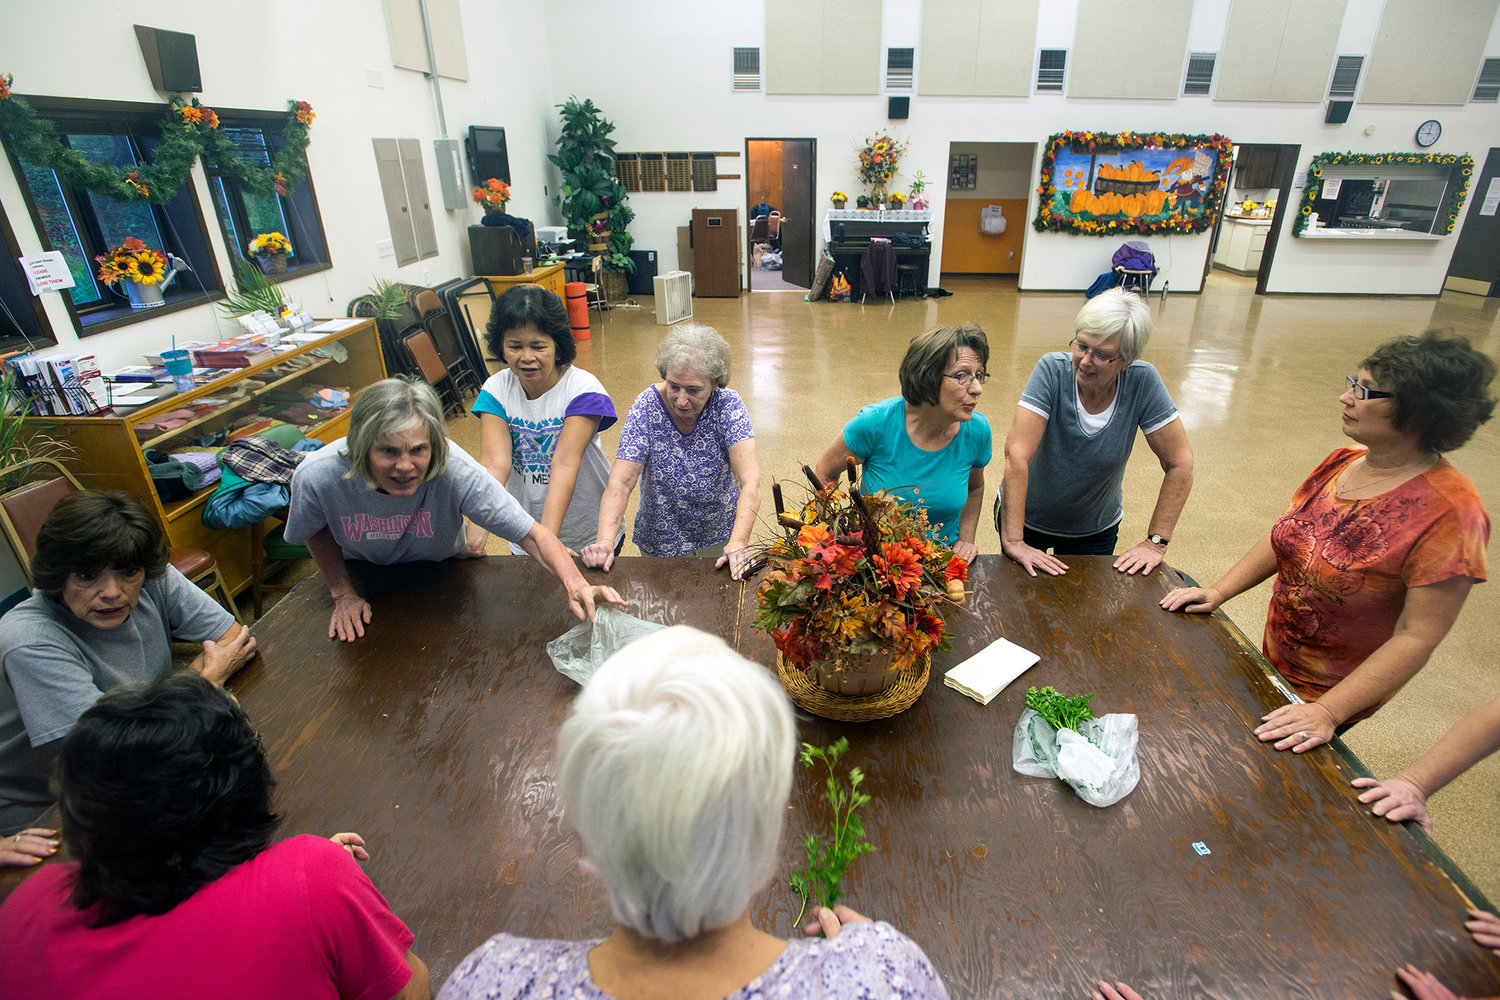 Women chatted about freshly picked herbs that were brought in to share as they took a break to stretch prior to starting the aerobic portion of the Toledo Senior Center's women's exercise class in October 2014.